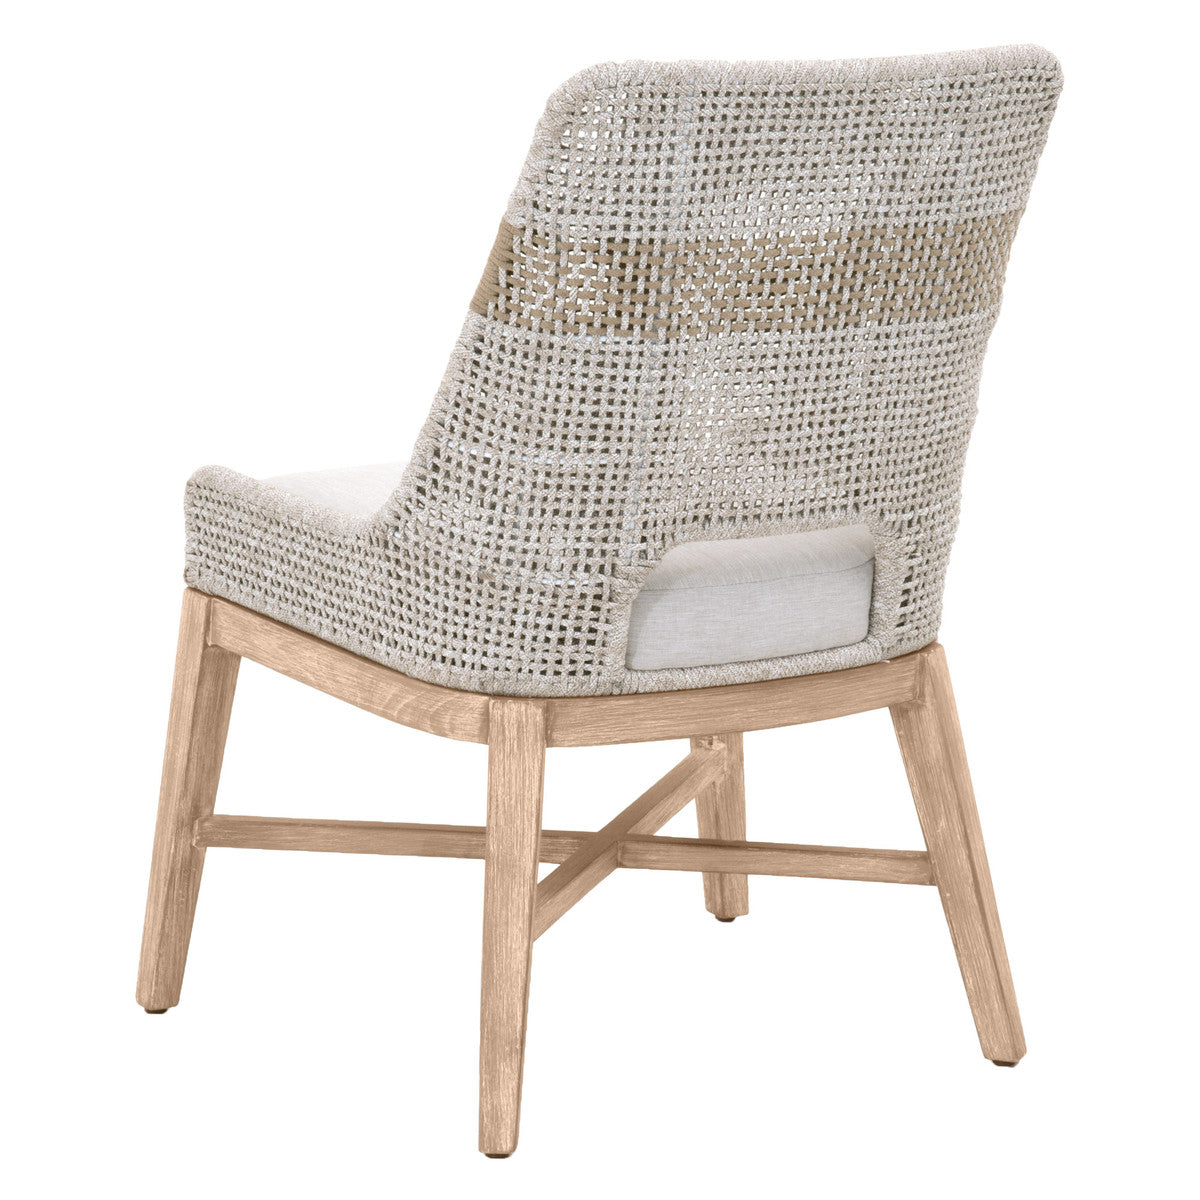 Tapestry Dining Chair in Taupe & White Flat Rope, Taupe Stripe, Performance Pumice, Natural Gray Mahogany, Set of 2 - 6850.WTA/PUM/NG